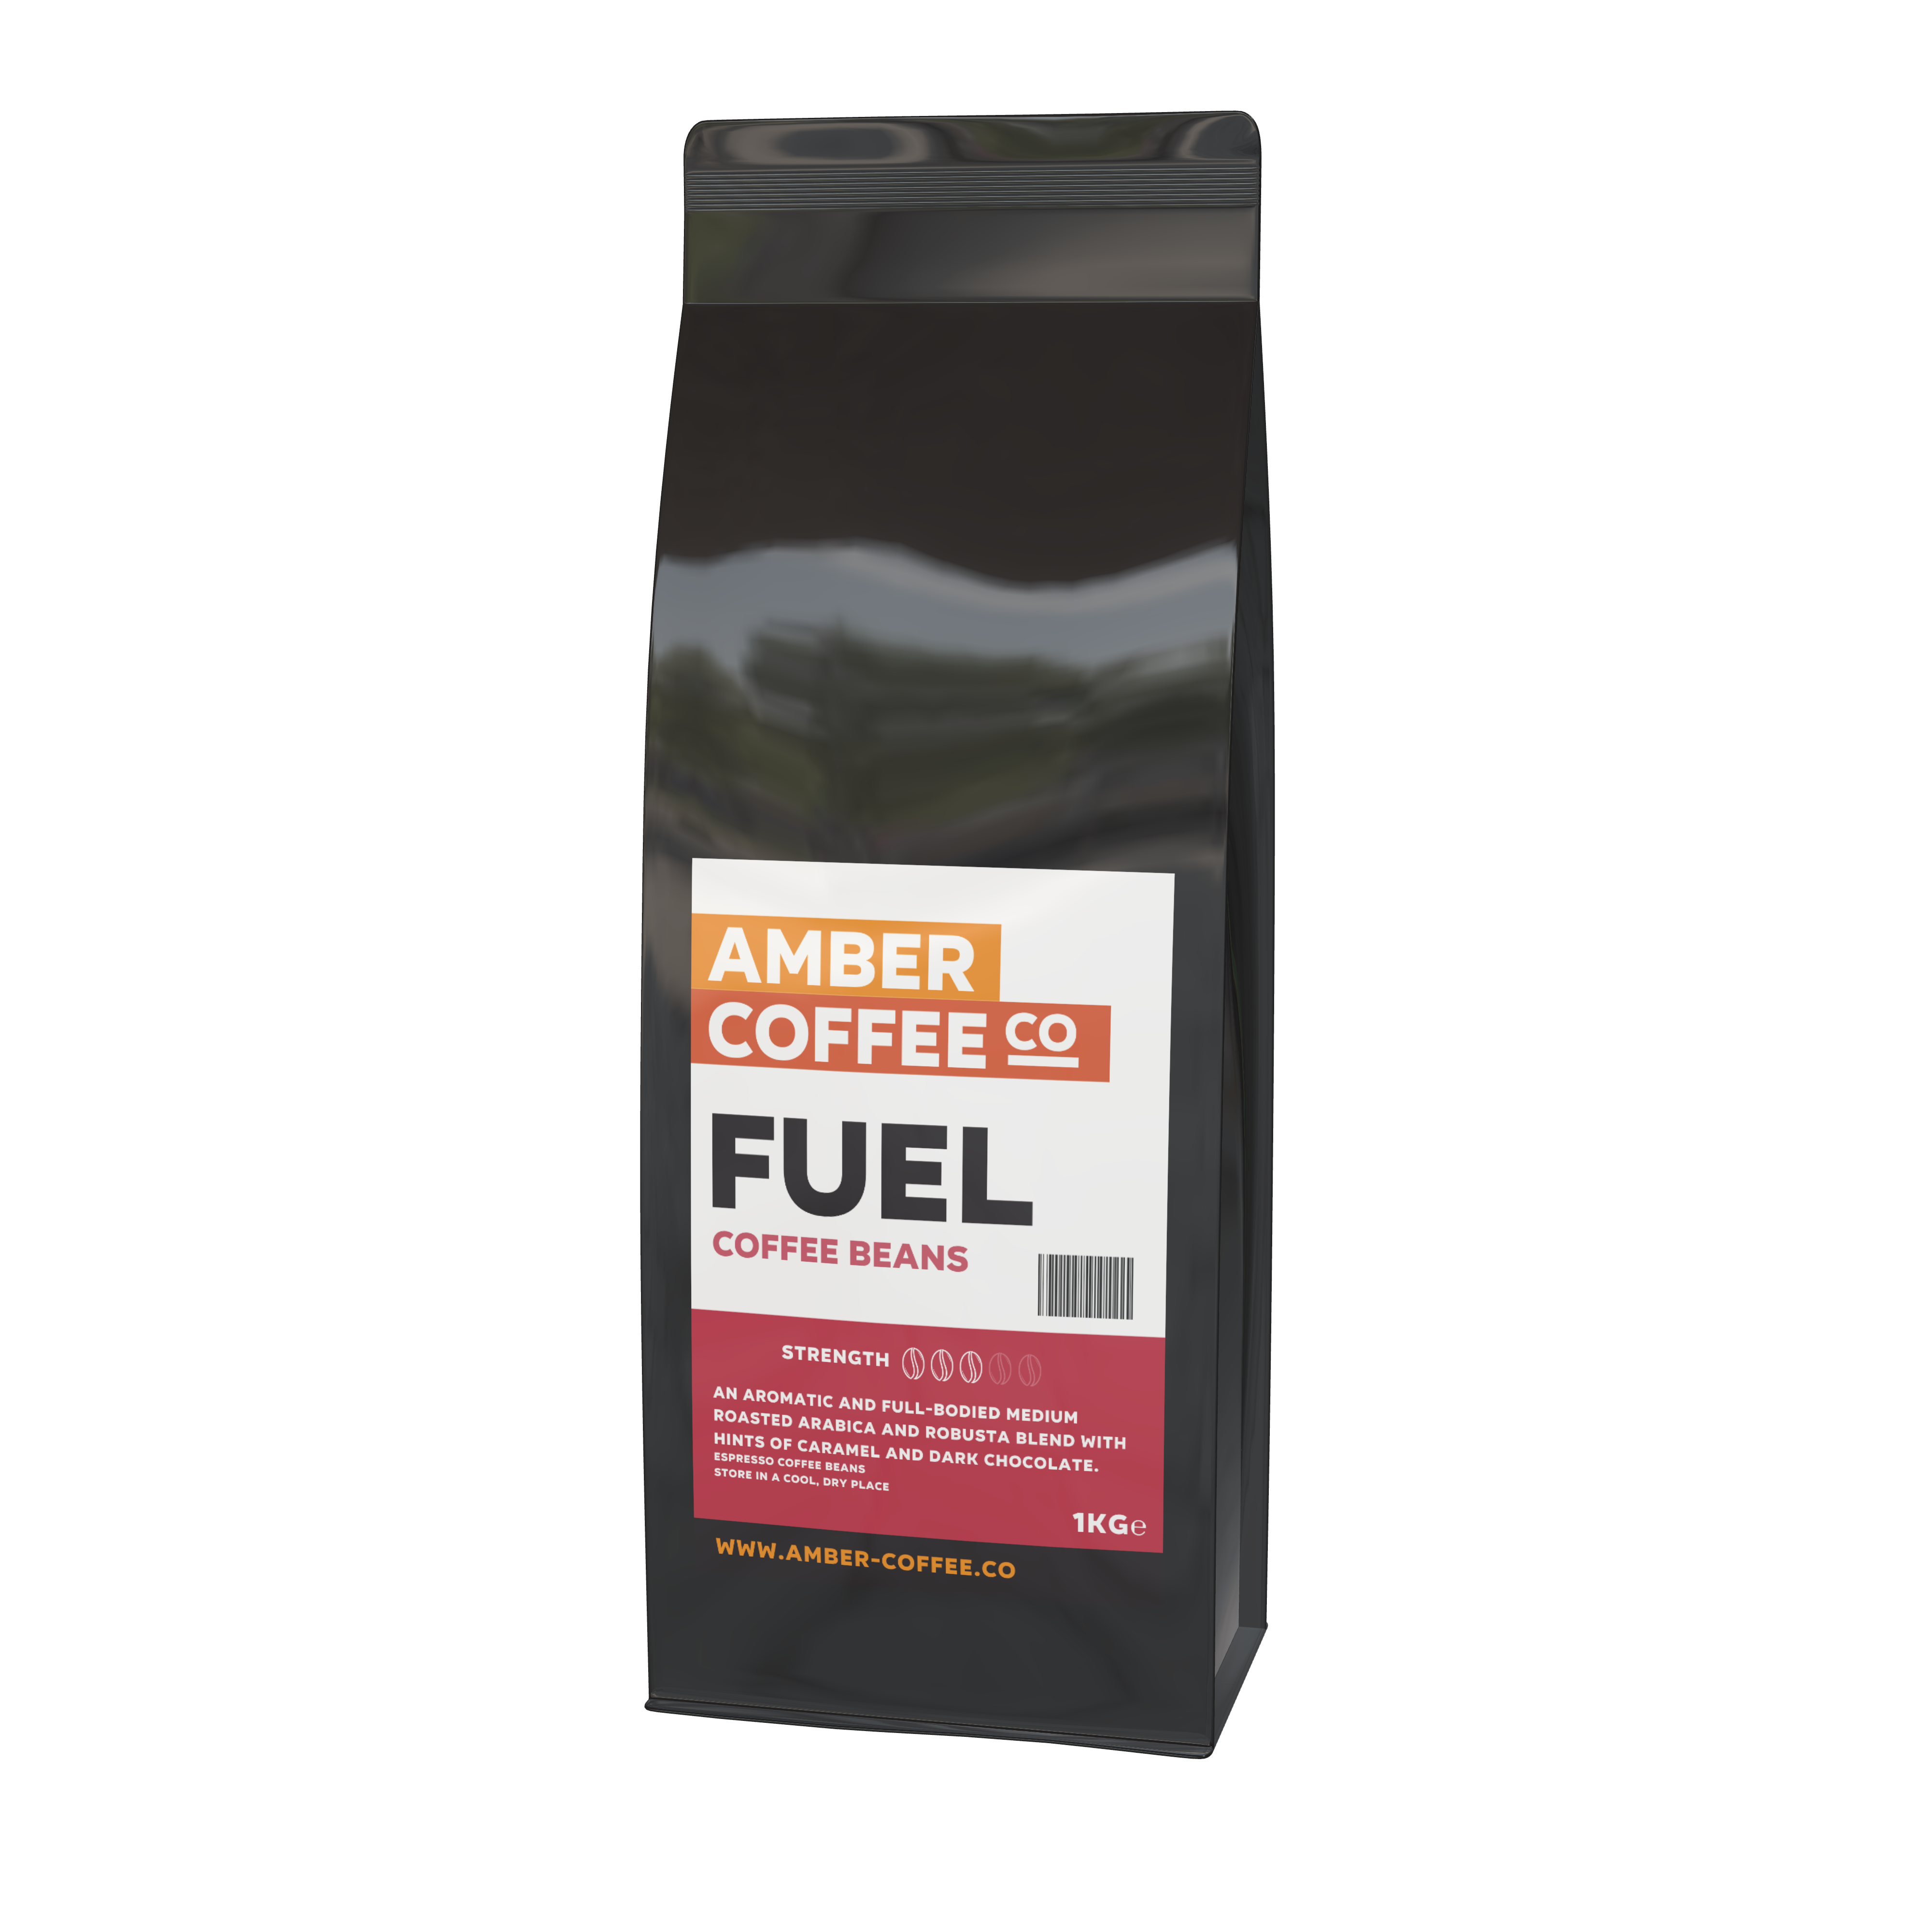 Amber Coffee Co - Fuel Blend - Premium Coffee Beans (Full Case 6 x 1KG Bags)